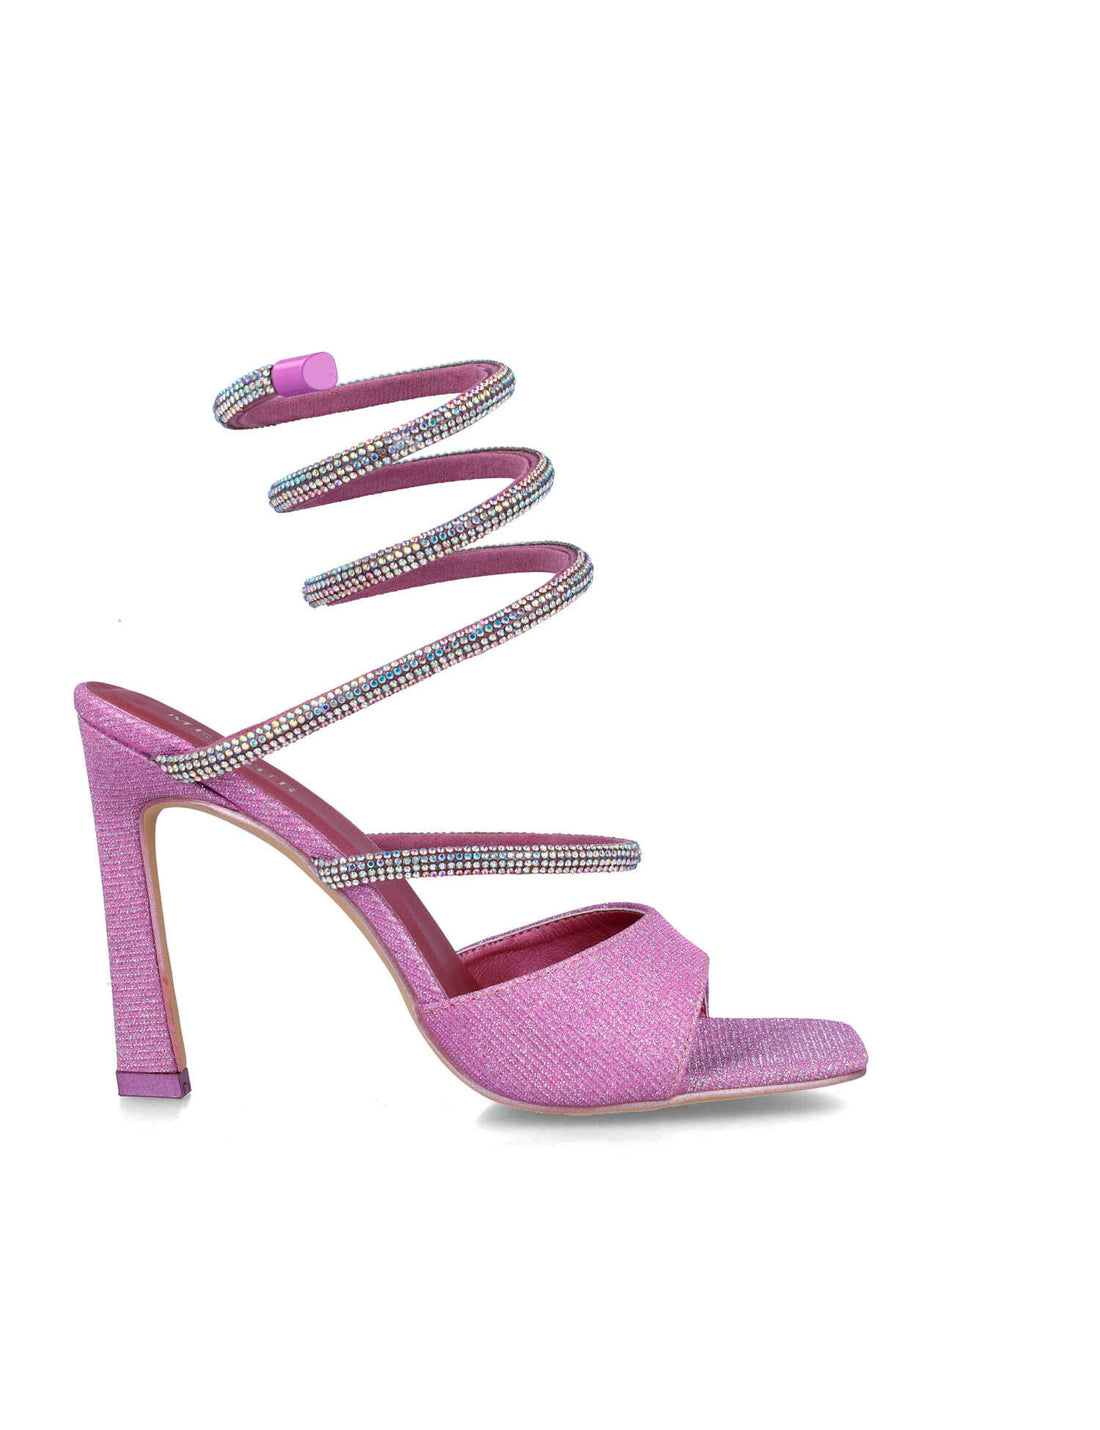 Pink Sandals With Embellished Wrap Strap_24712_03_01